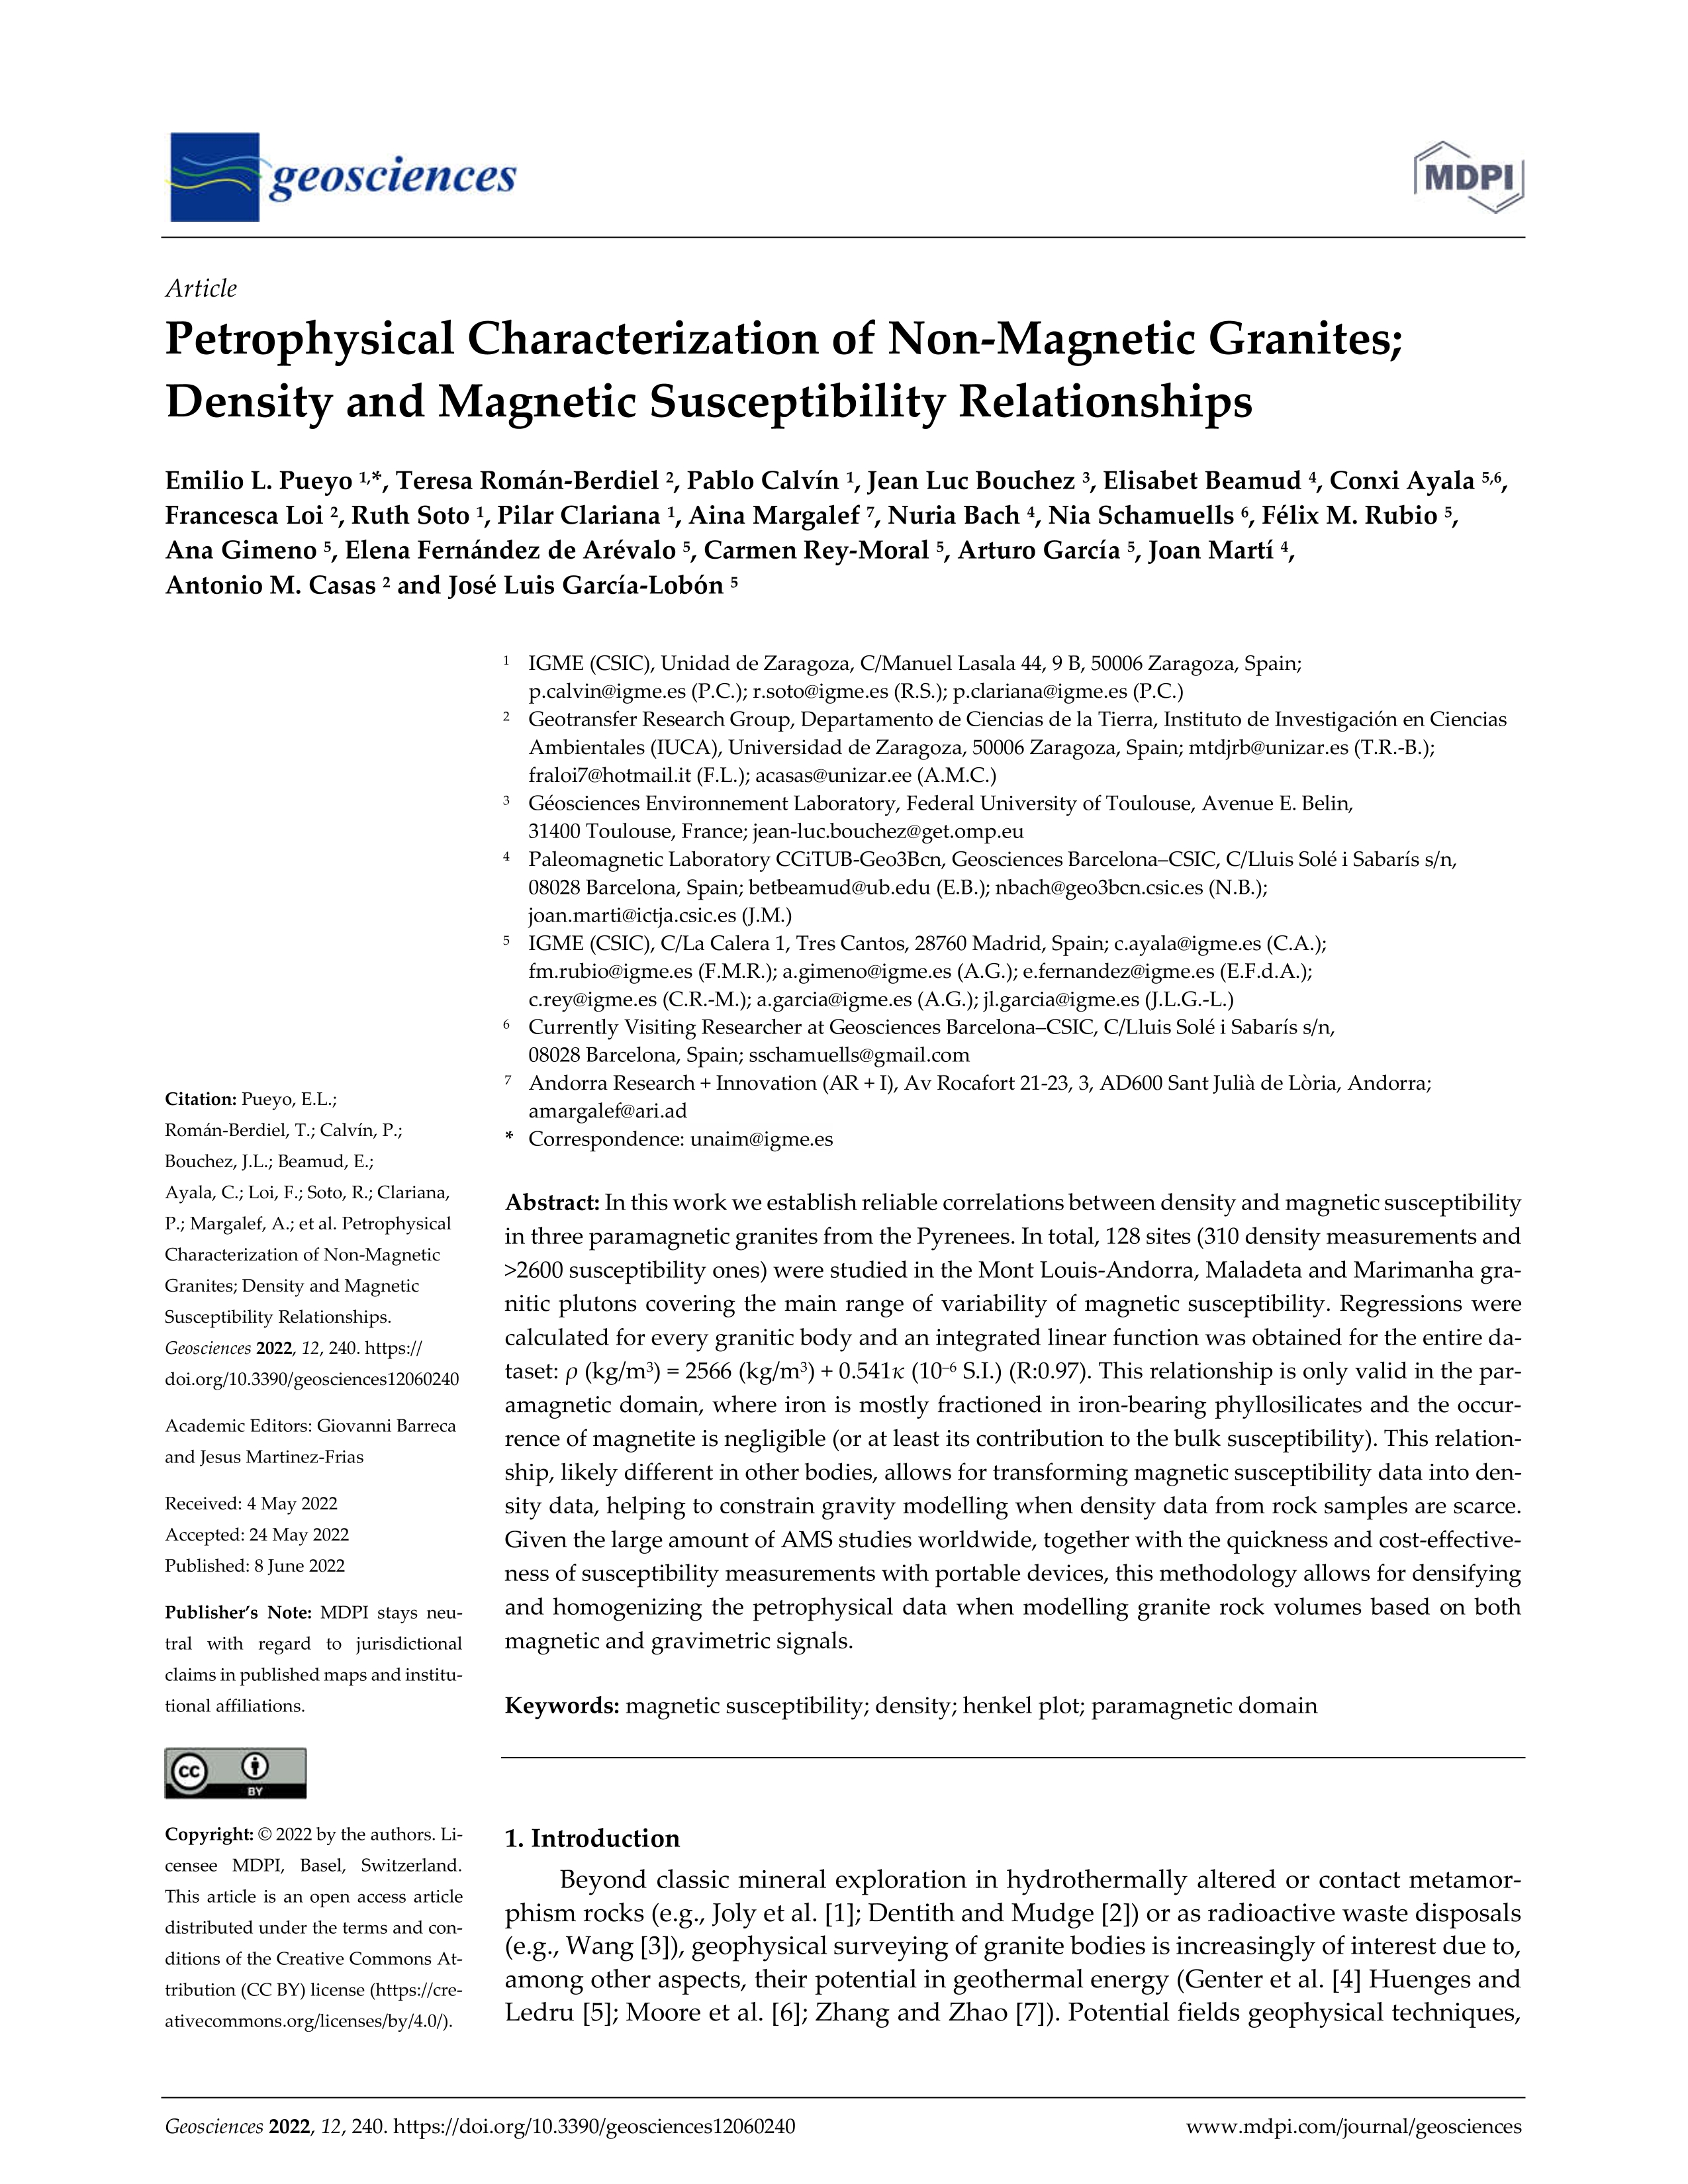 Petrophysical Characterization of Non-Magnetic Granites; Density and Magnetic Susceptibility Relationships